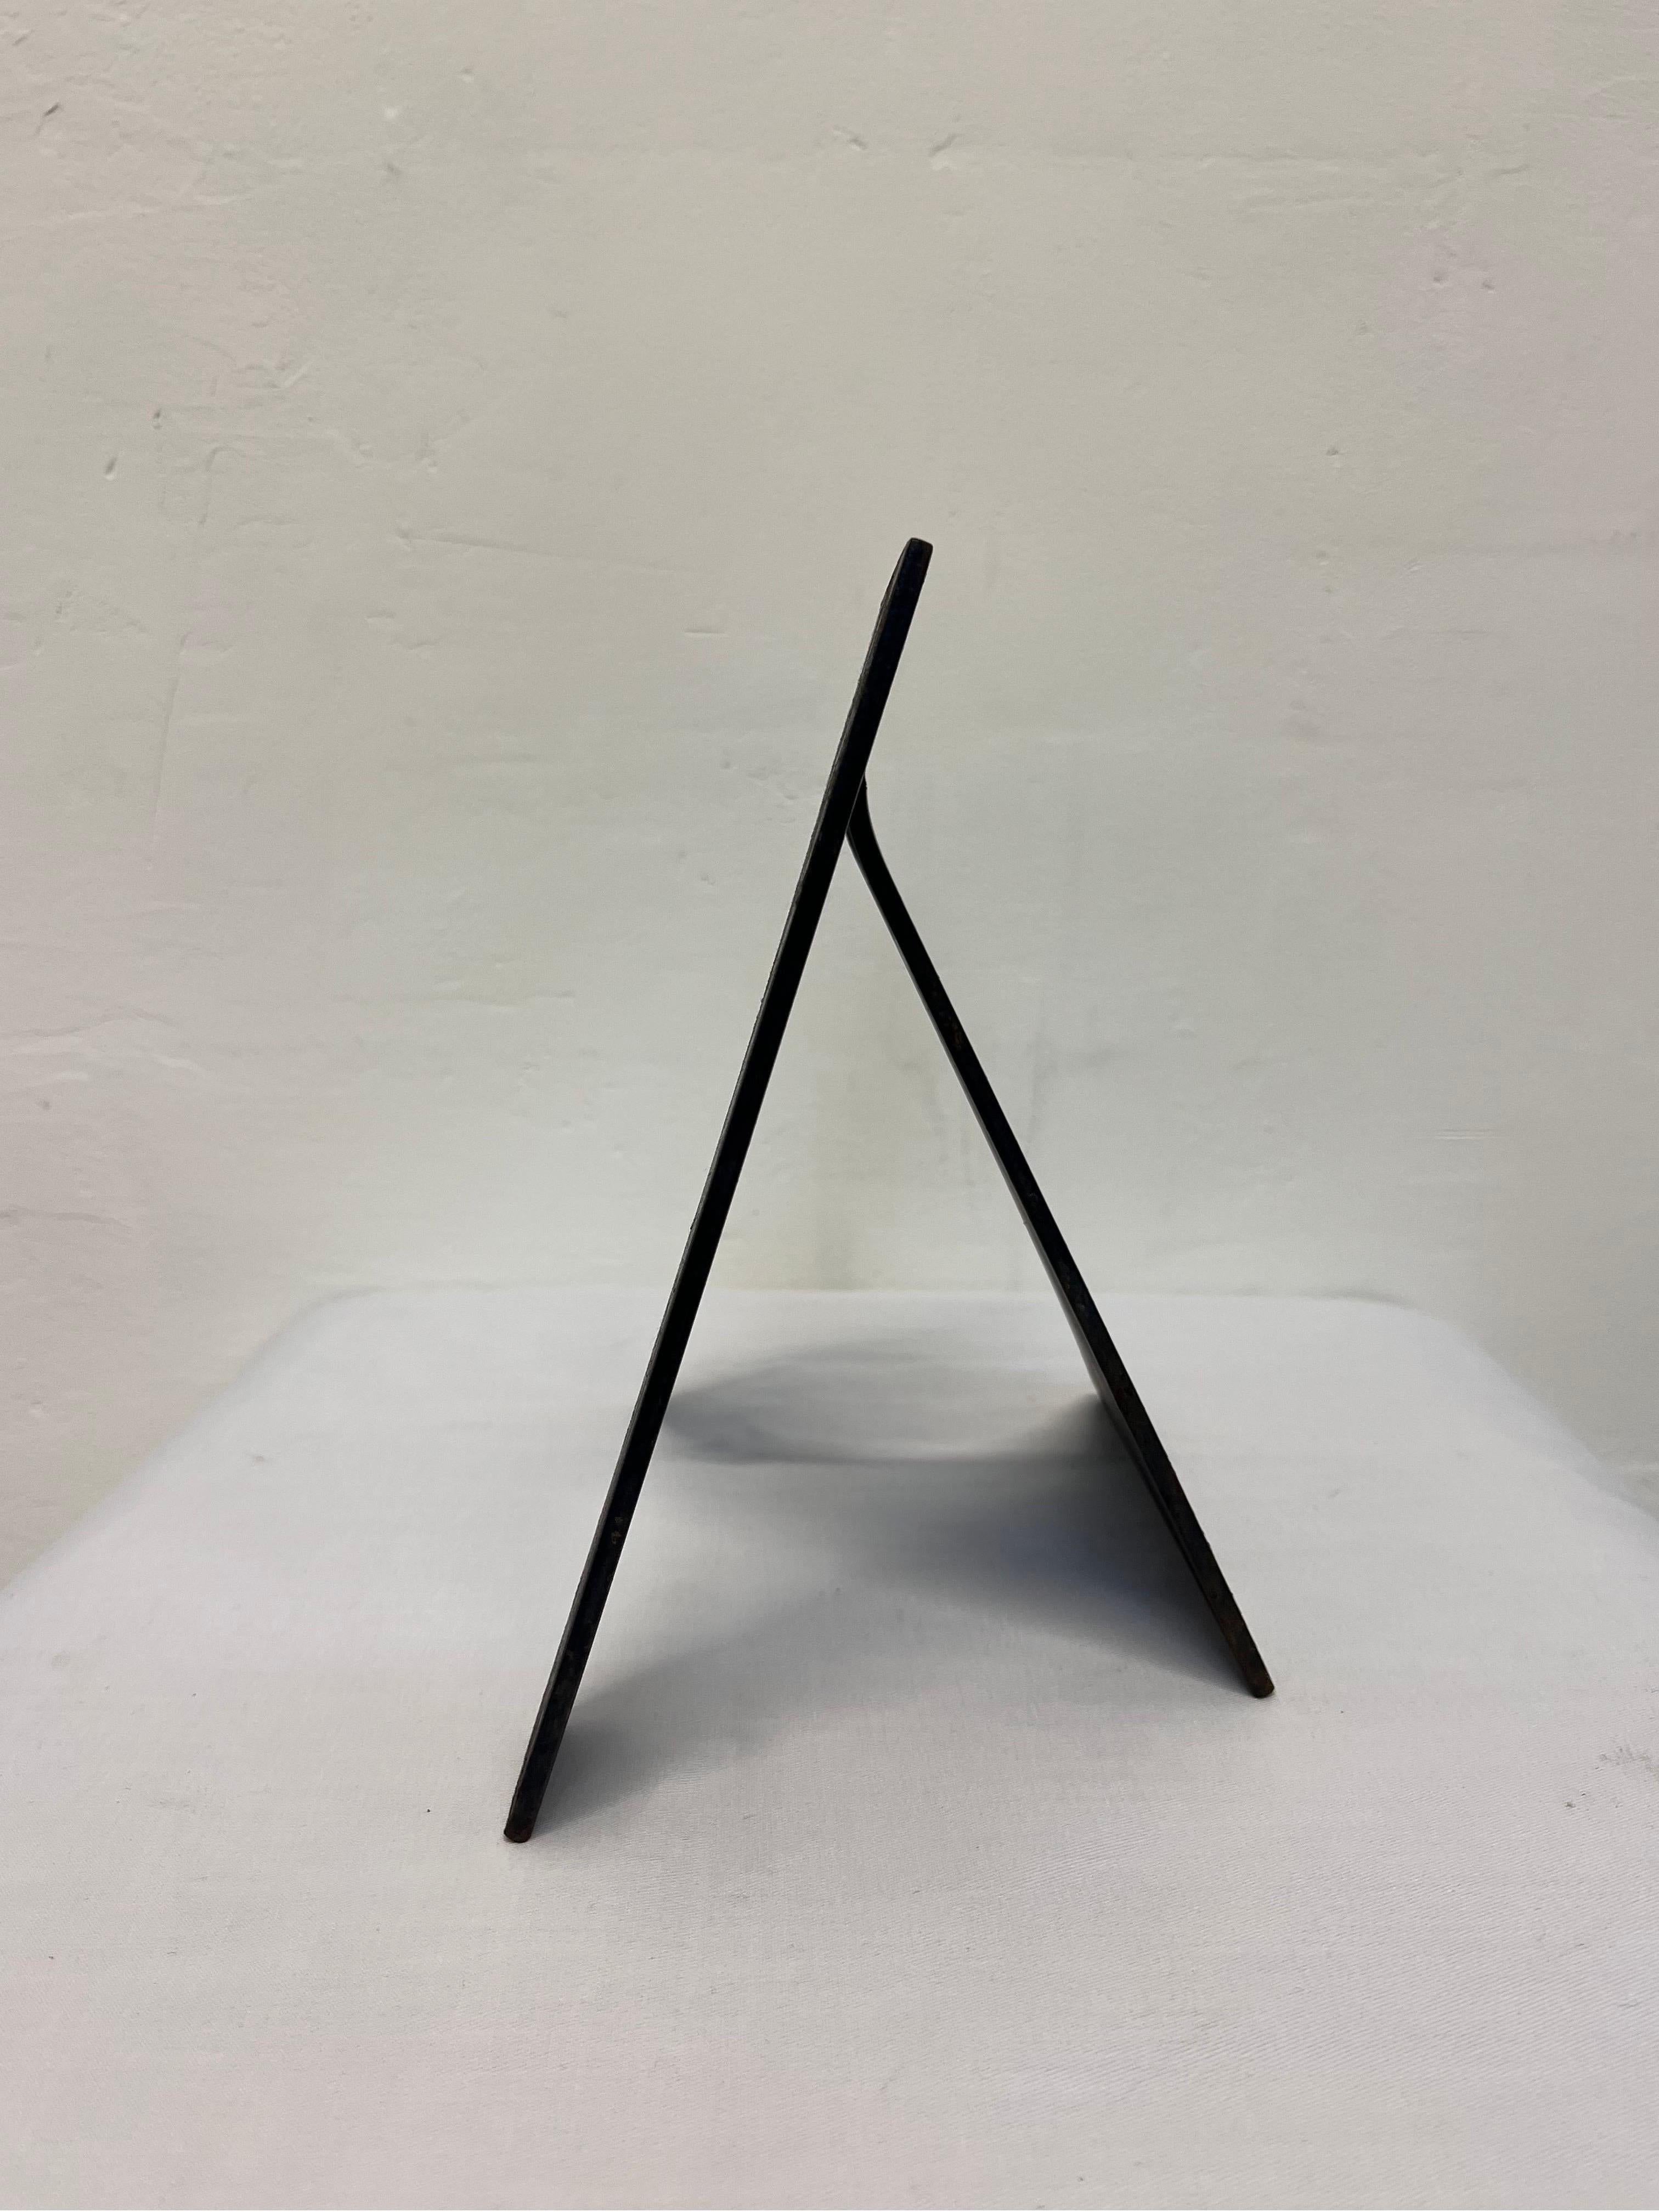 Brazilian Modern Black Steel Abstract Table Sculpture, 1980s For Sale 3